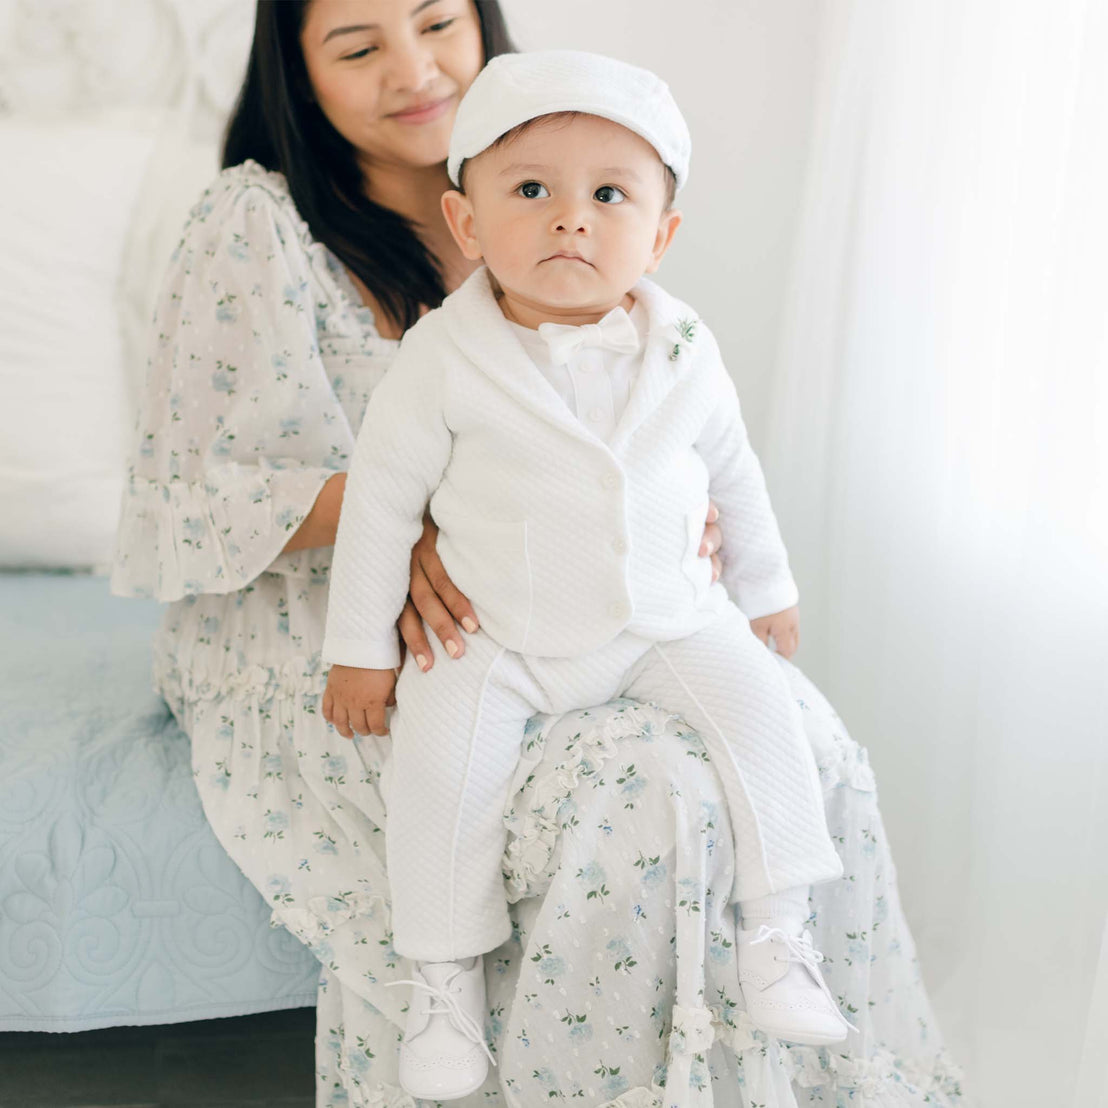 A young child wearing the Elijah 3-Piece Set, which includes a white christening suit and matching cap, along with white shoes, sits on the lap of a woman in a light floral dress. They are indoors in a well-lit room. The woman has long dark hair and is smiling while looking at the child.